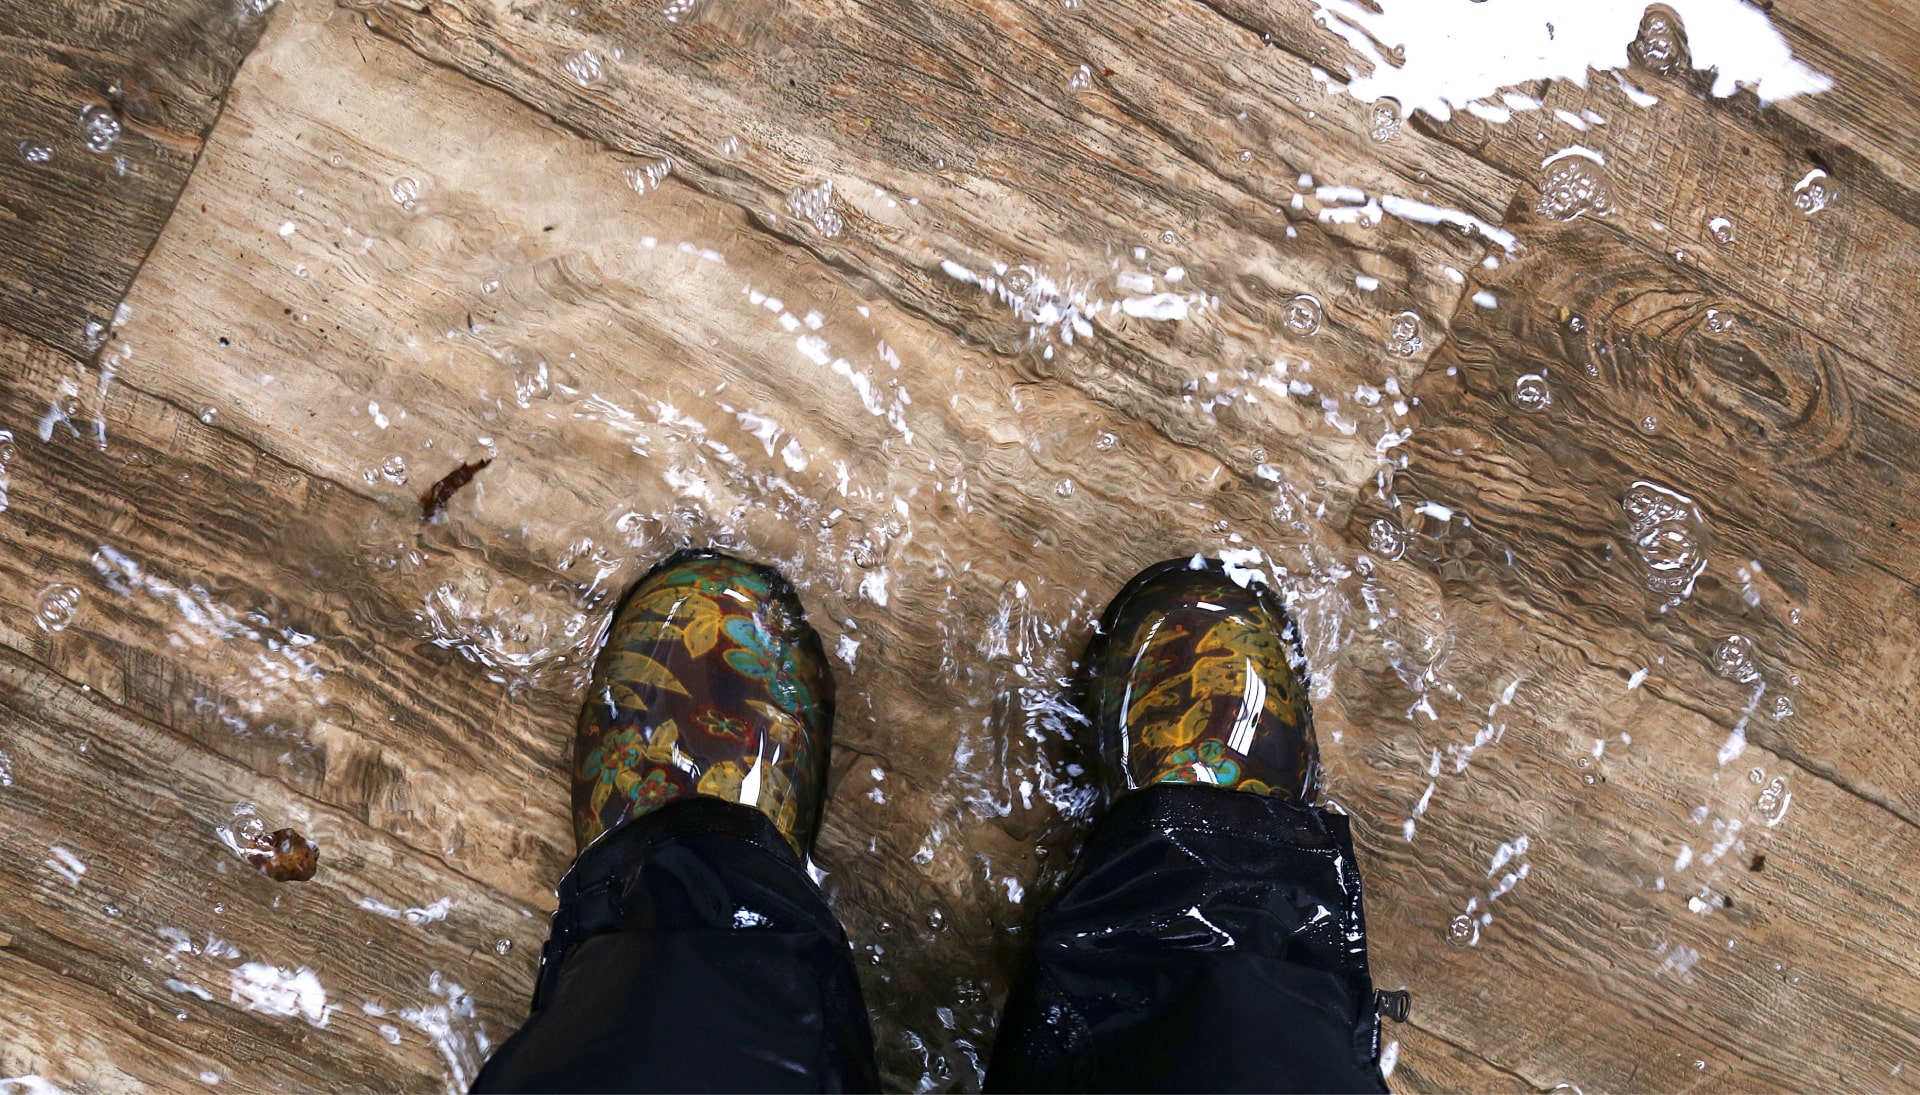 Homeowner walks through flood waters wearing rain boots as they await water damage cleanup in Billings, MT.